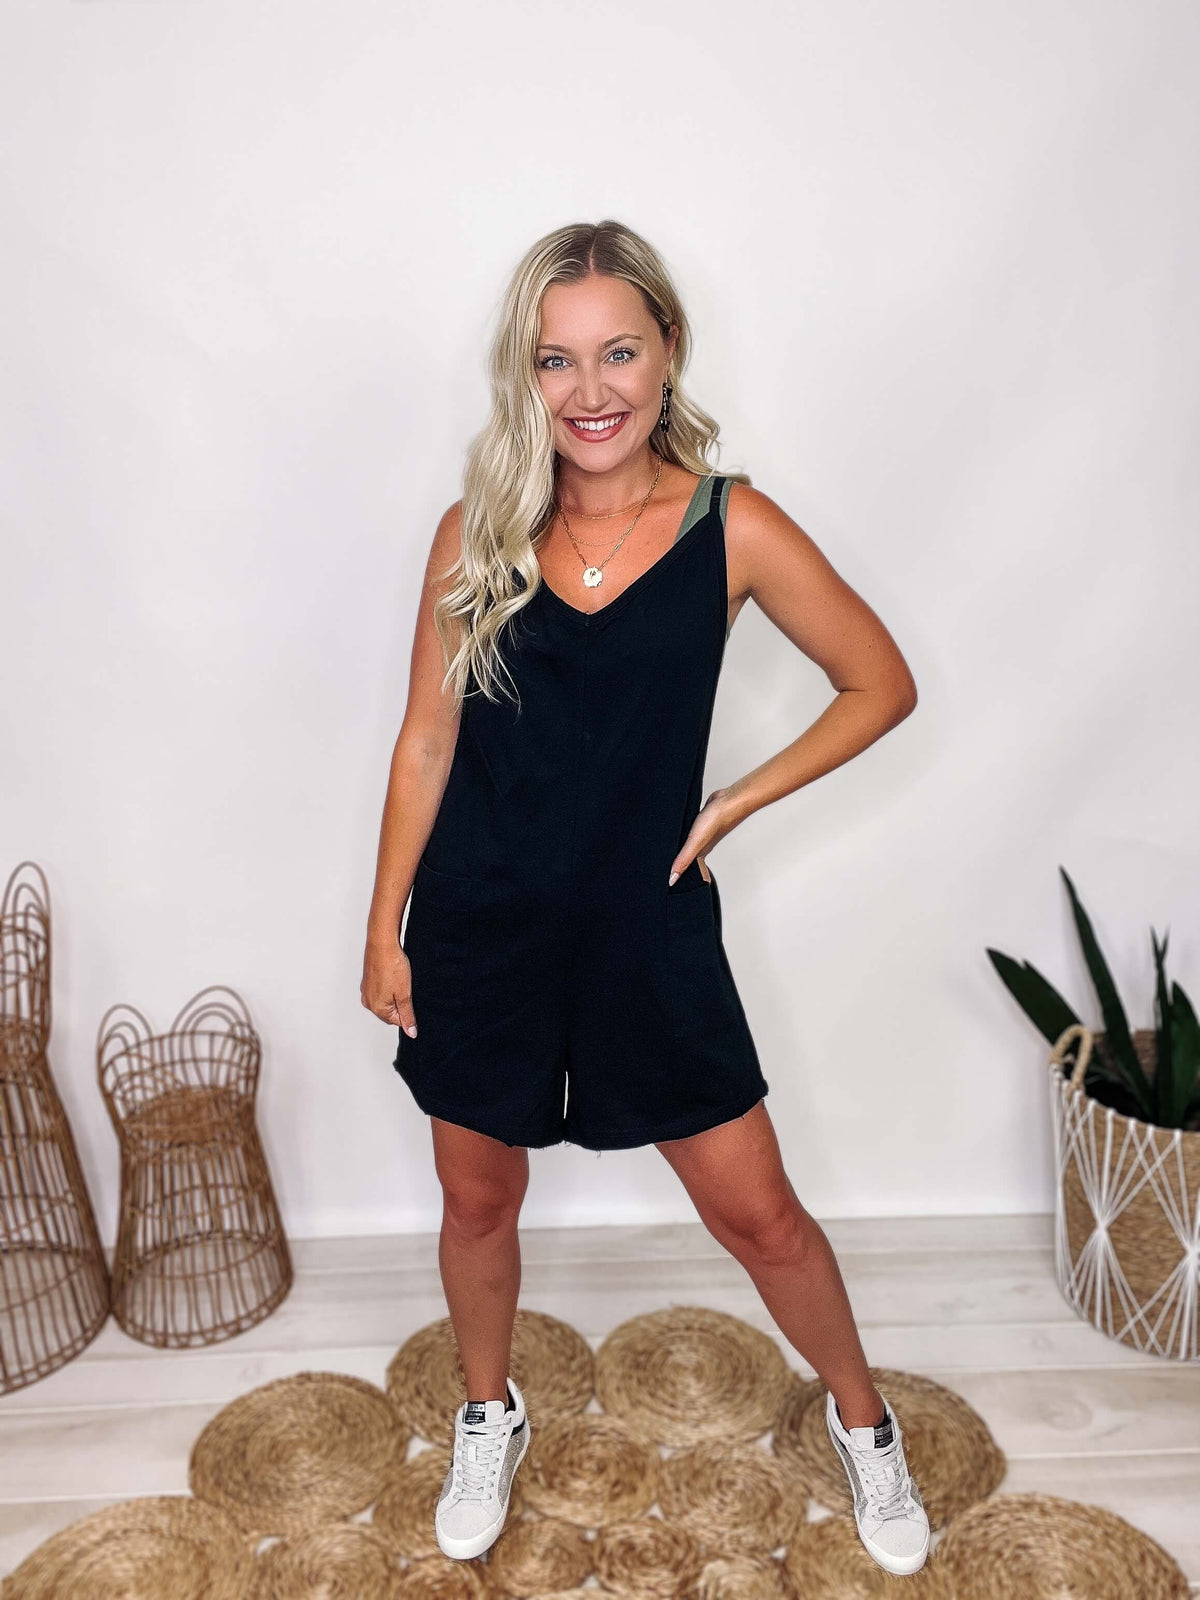 Ces Femme Black V-Neck Spaghetti Strap Romper Two Pockets Oversized/Relaxed Fit 85% Cotton, 15% Polyester